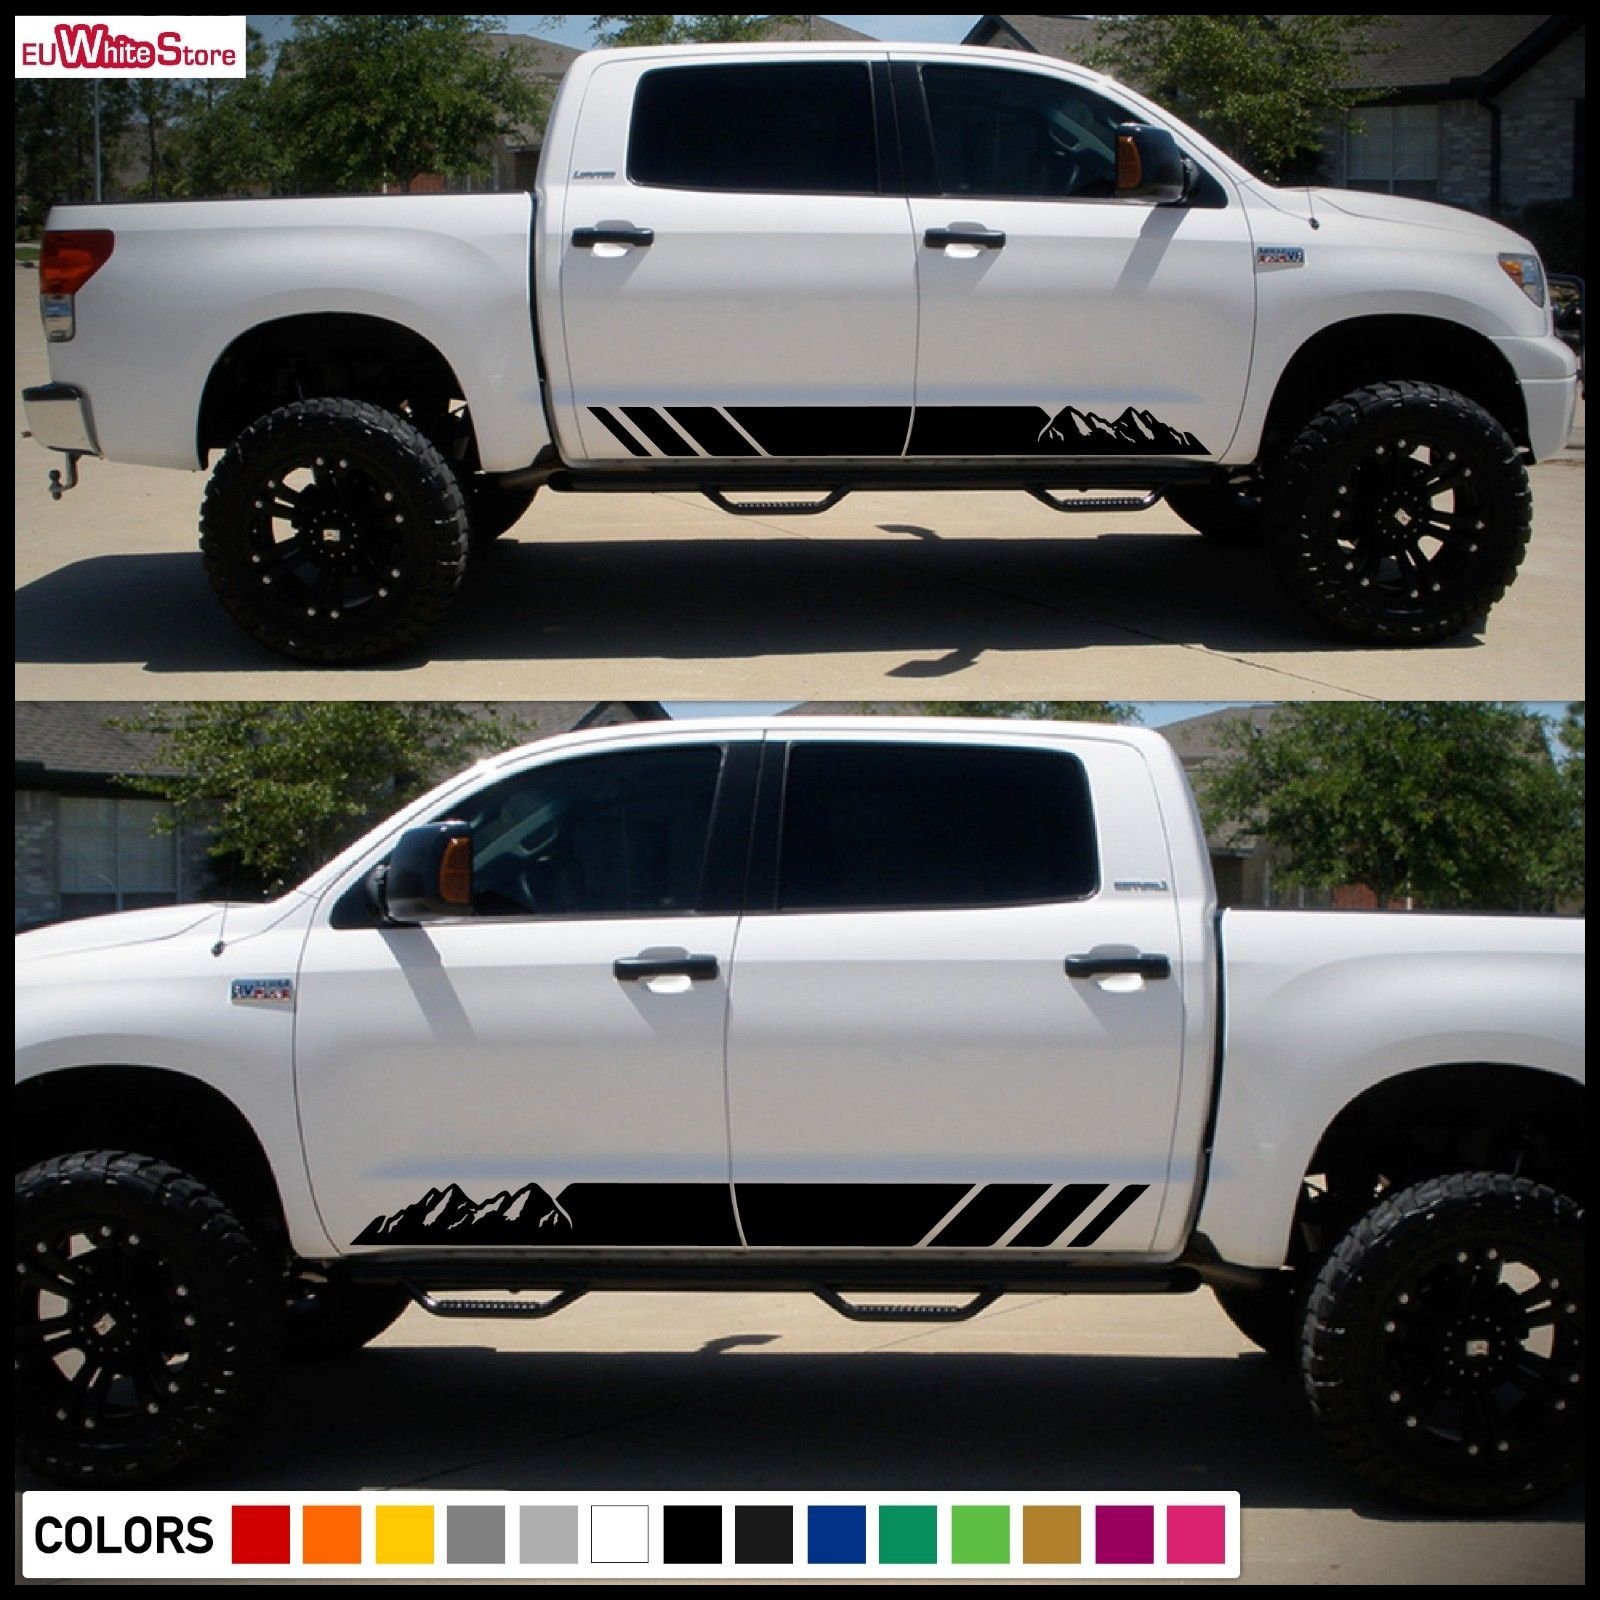 Decal Sticker Vinyl Side Stripes for Toyota Tundra Bumper Light LED 4x4 f road 1 of 3FREE Shipping